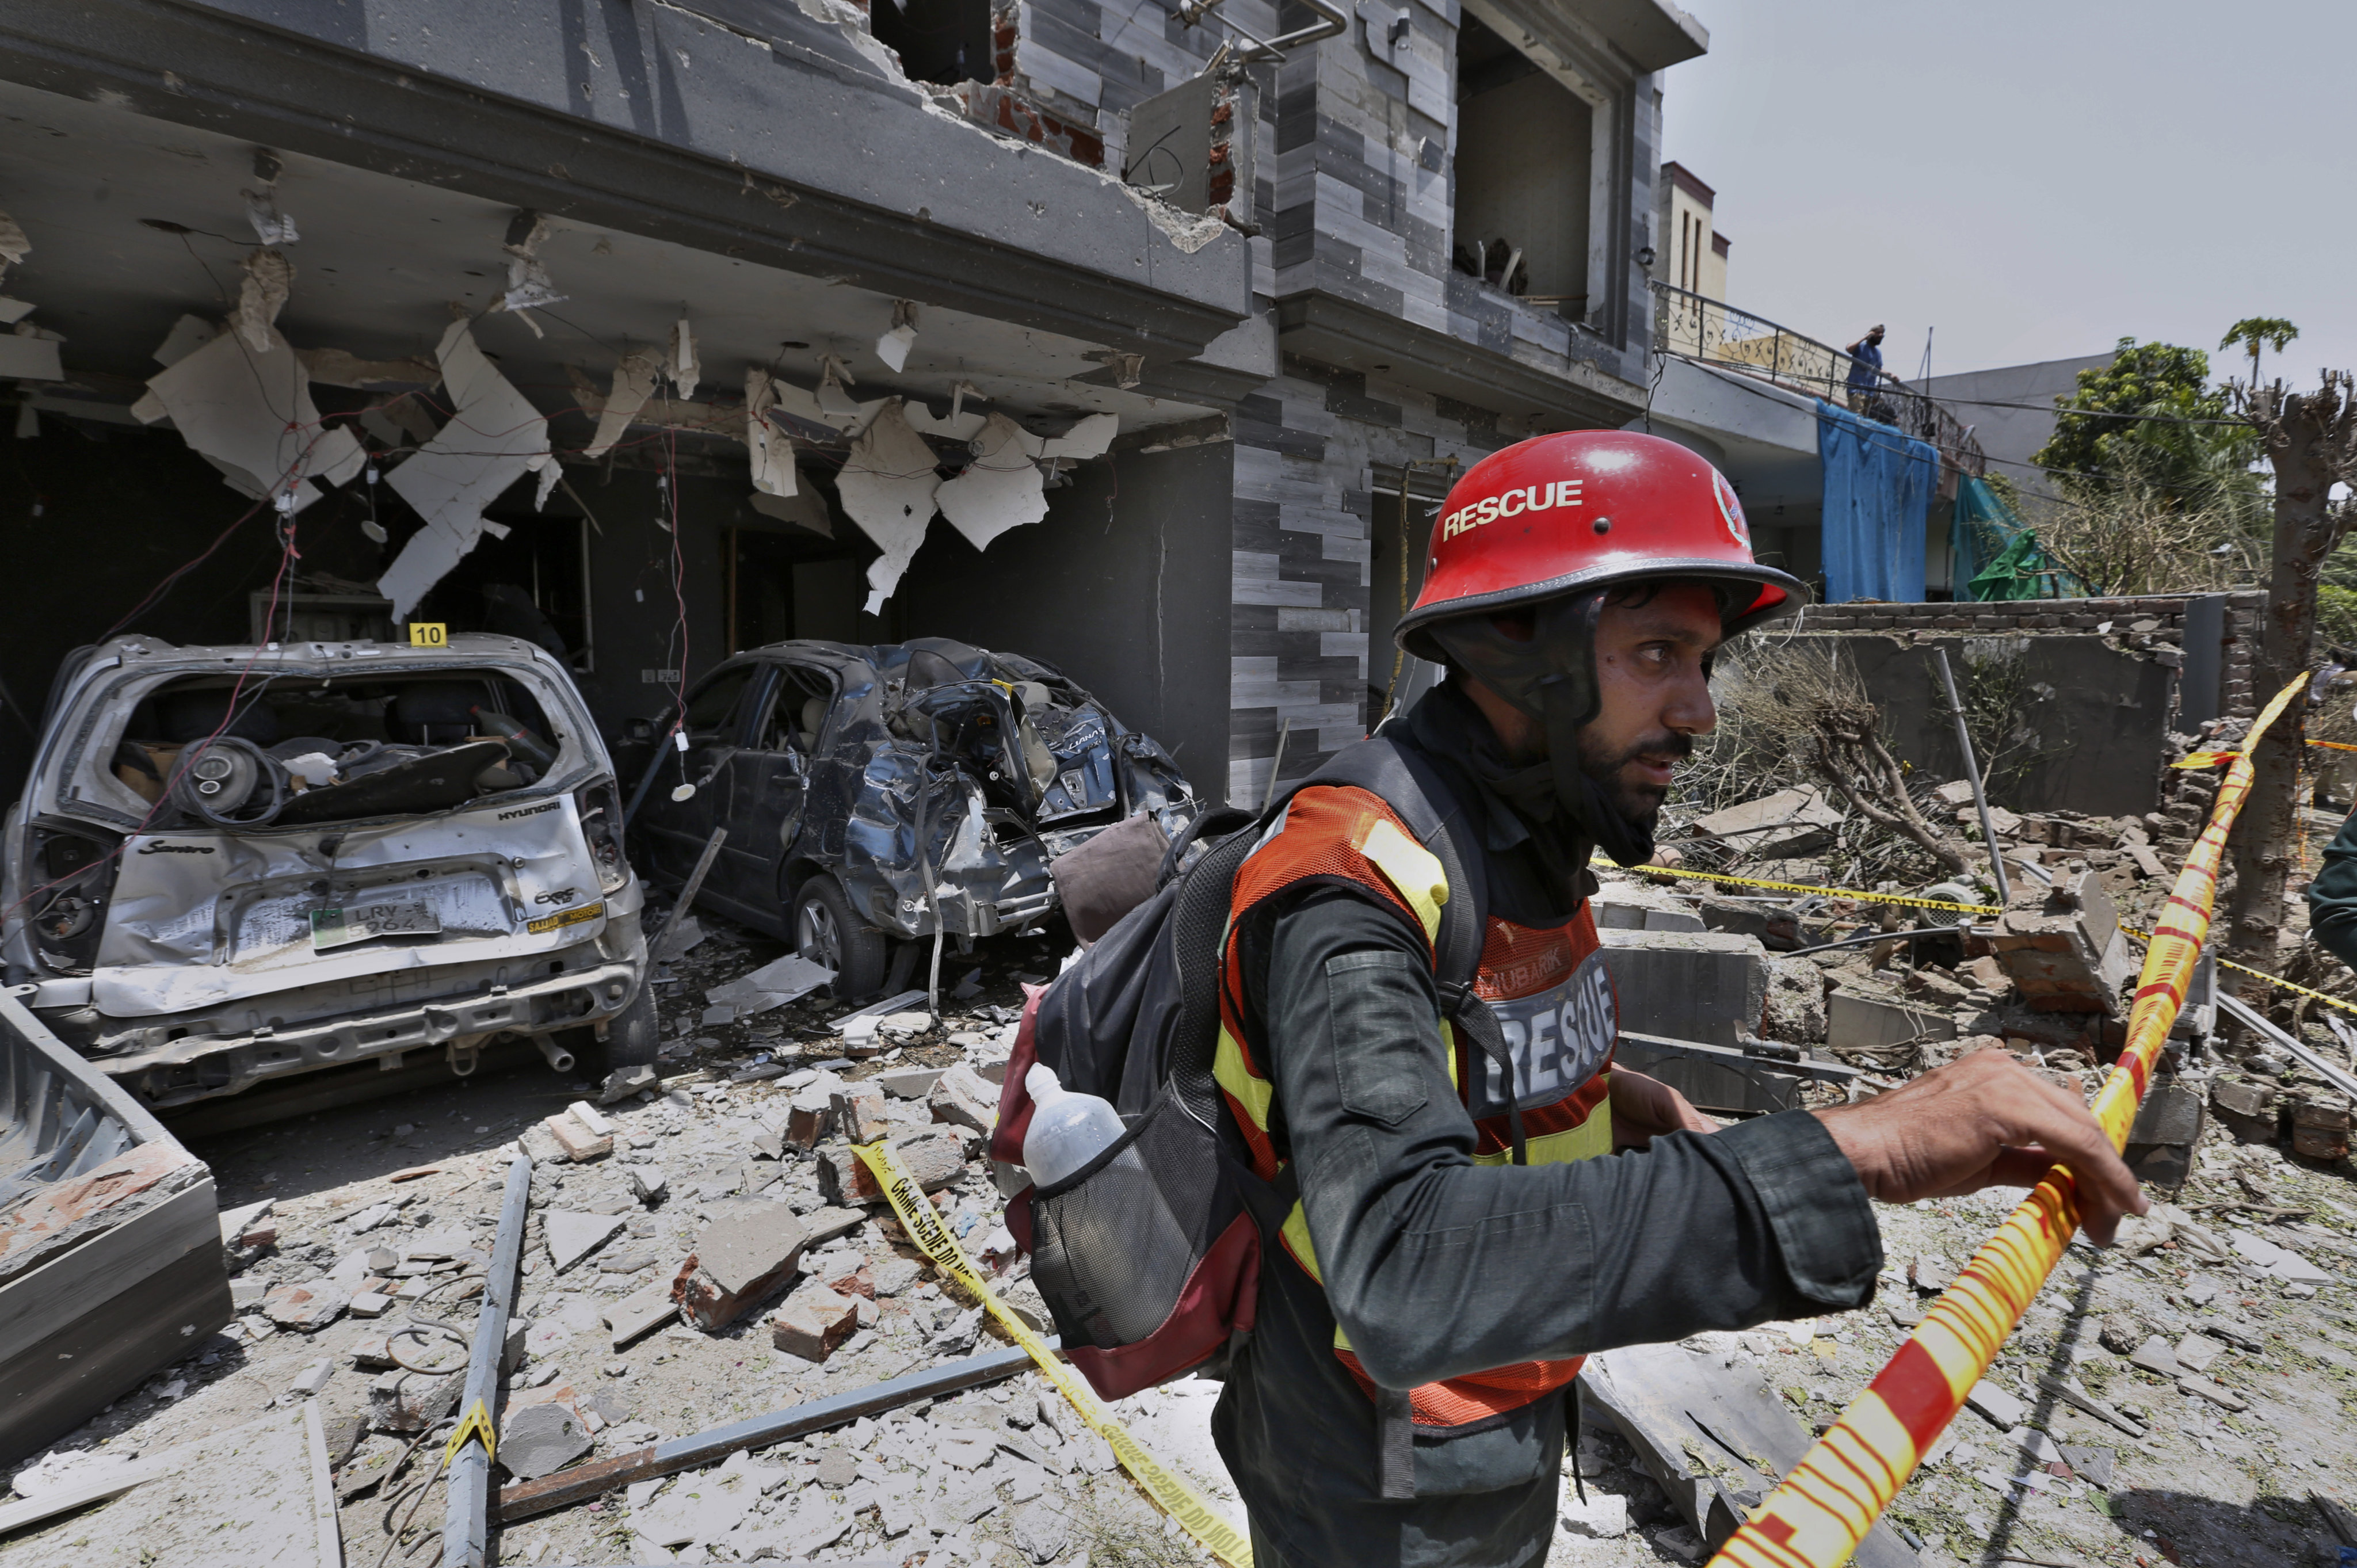 A rescue worker examines the site of an explosion in Lahore, Pakistan, on June 23. Pakistan’s national adviser has accused India of orchestrating the deadly car bombing. Photo: AP